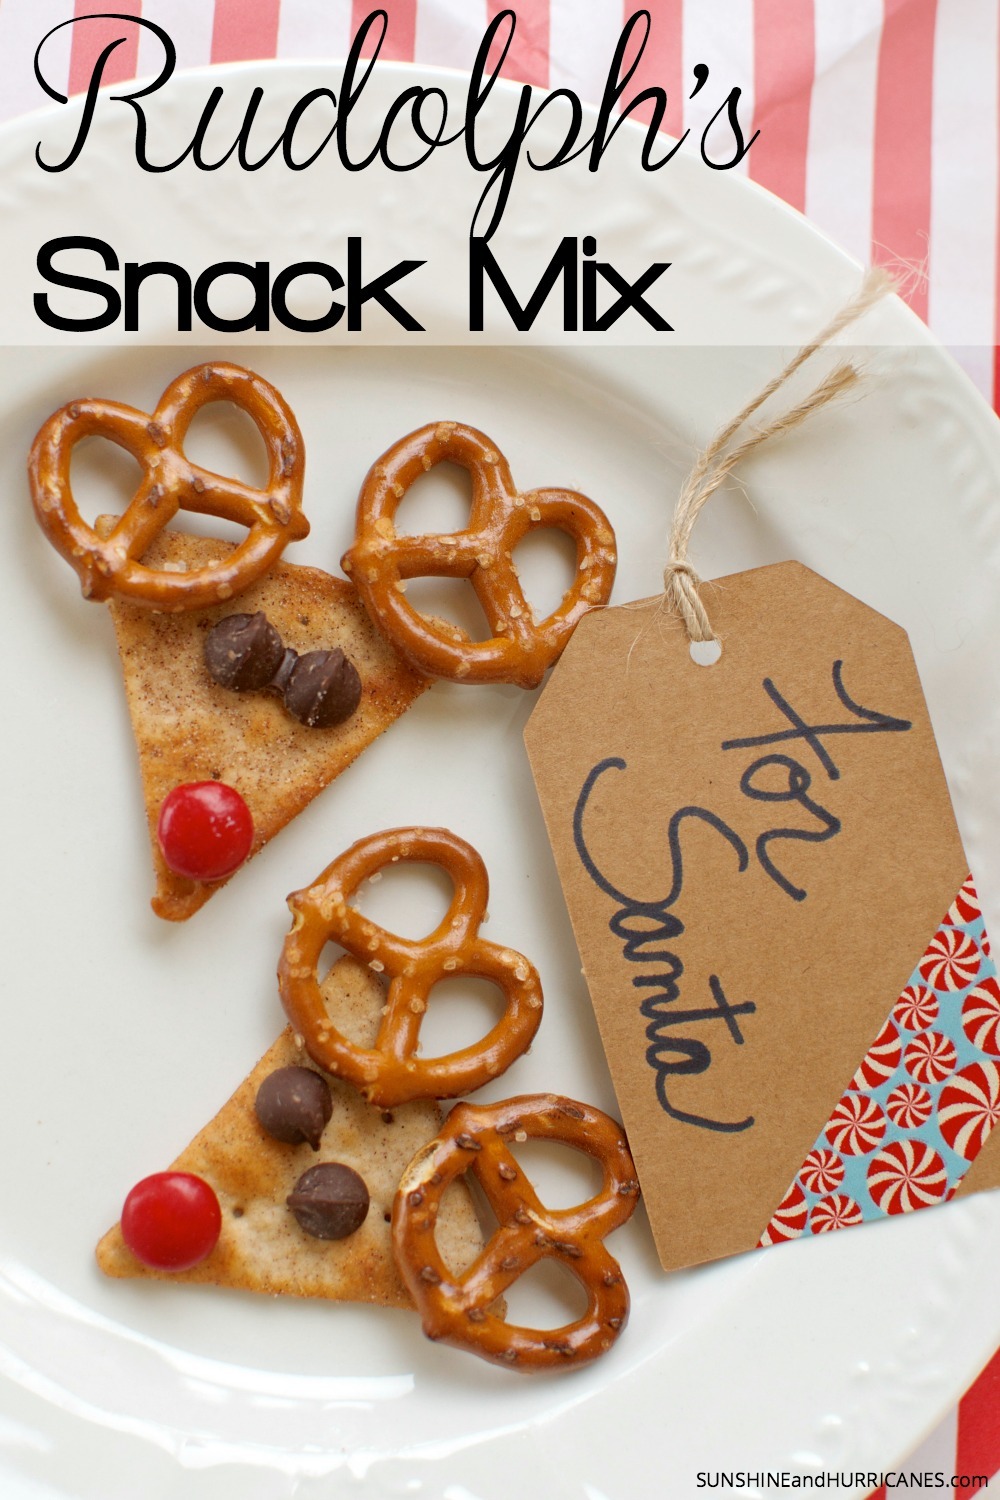 During the holidays there are few things more treasured than curling up with your kiddos on the couch, drinking hot cocoa and watching timeless classics together like Rudolph the Red Nosed Reindeer. To make the evening even just a little more special, you can pull together this Rudolph's Snack mix in a matter of minutes. Just wait until you see the way their eyes light up when you serve this for their movie watching holiday snack. SunshineandHurricanes.com